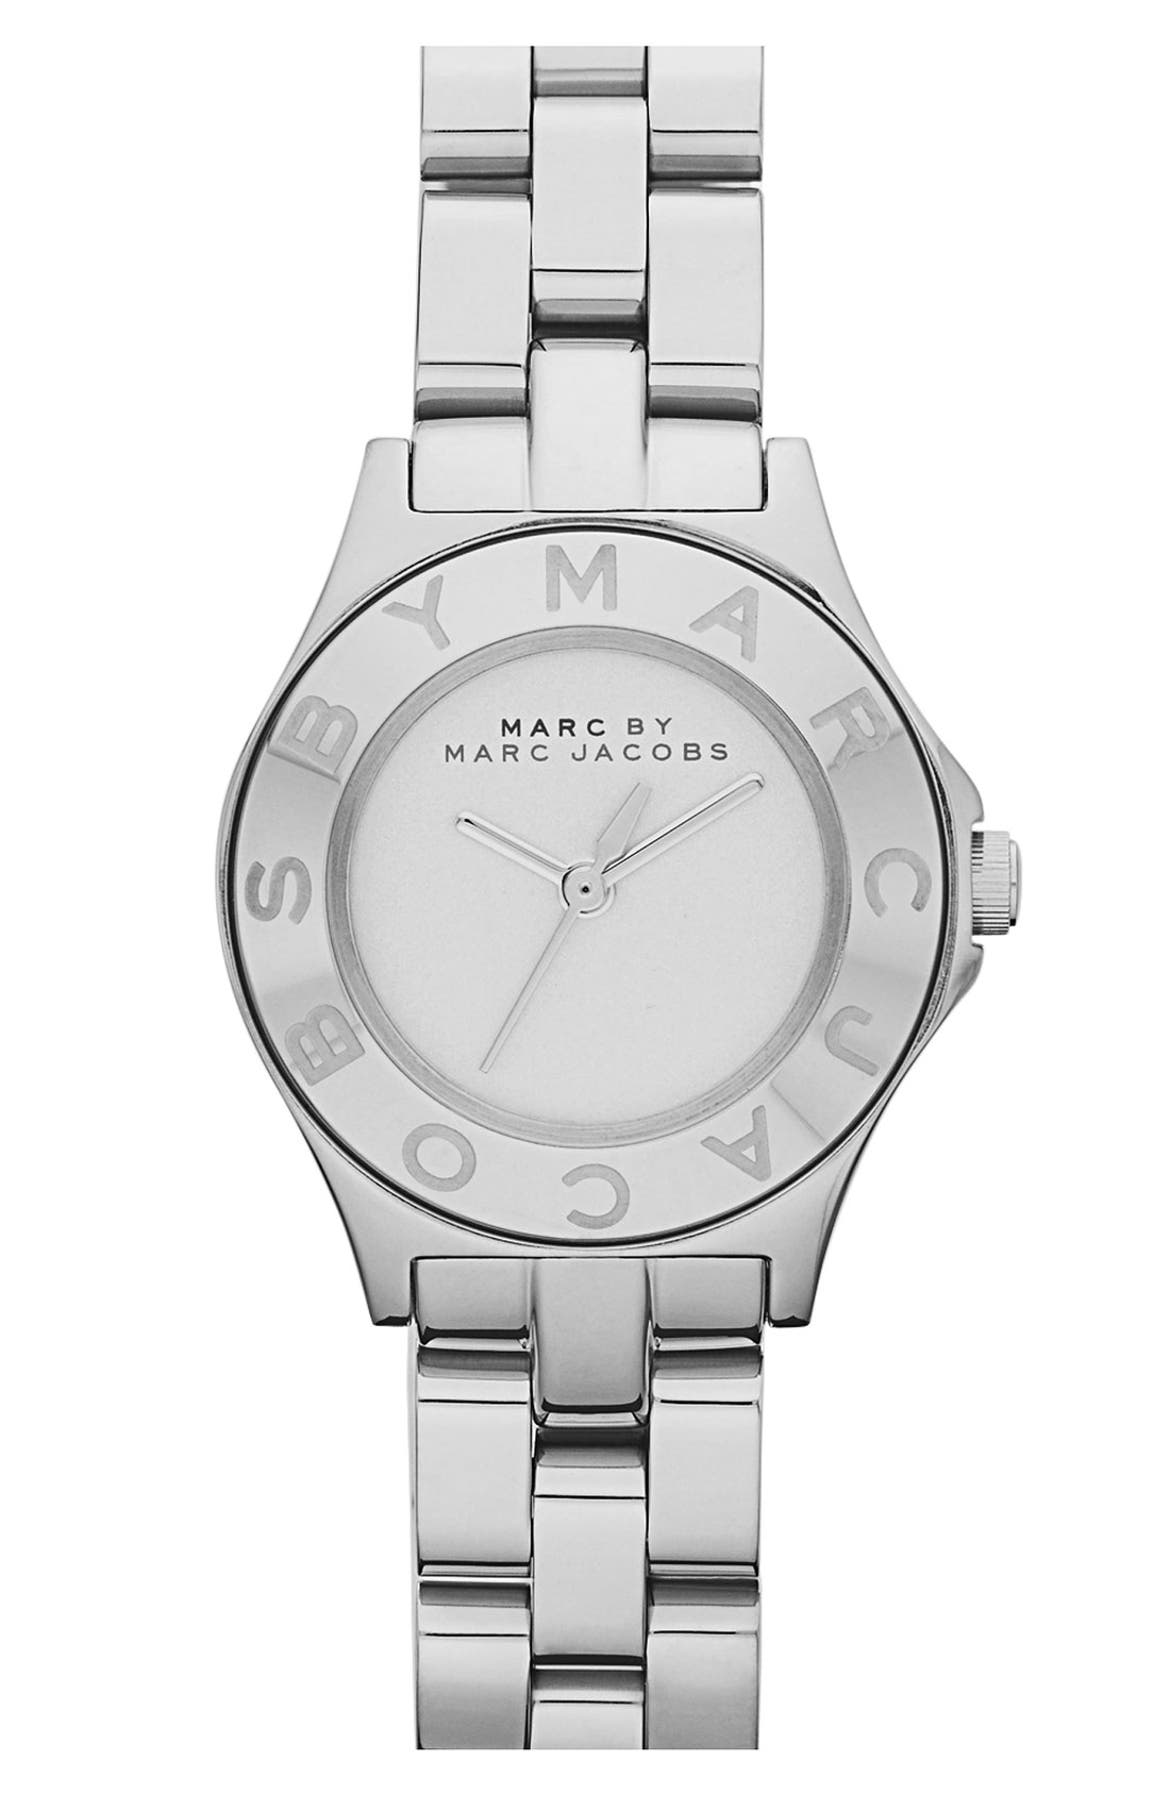 MARC BY MARC JACOBS 'Small Blade' Round Bracelet Watch, 26mm | Nordstrom